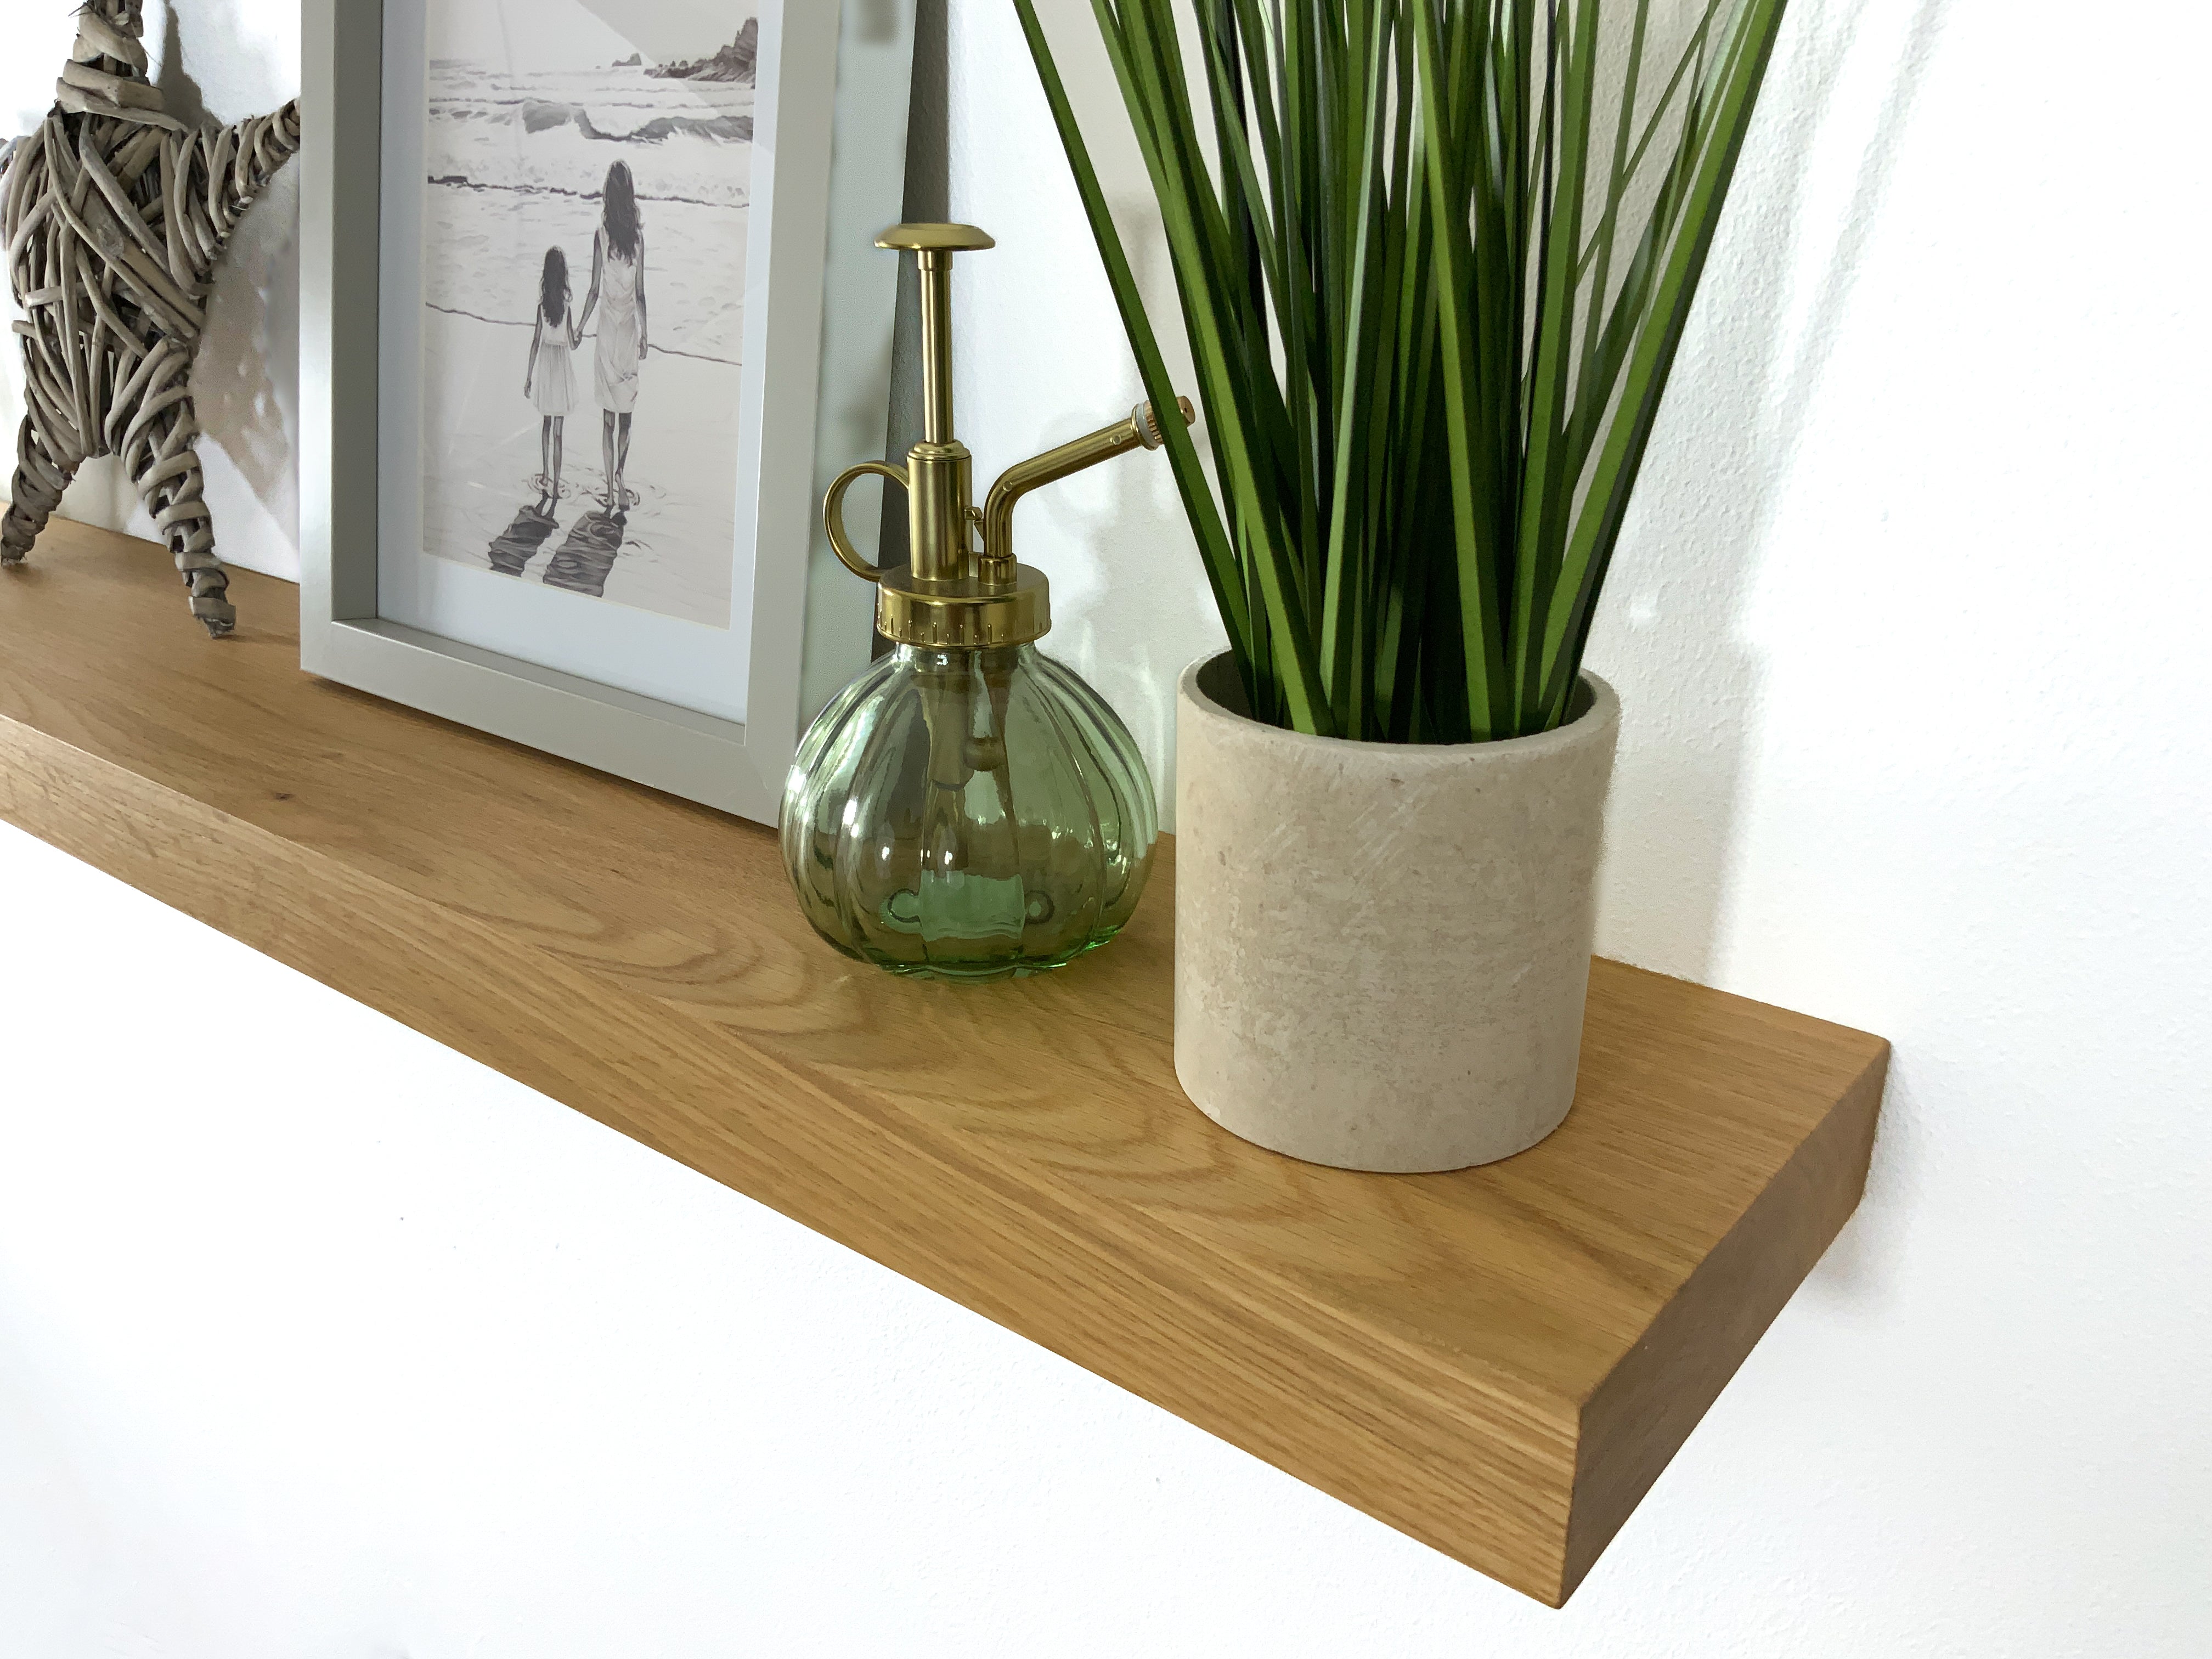 Floating Shelves - Gorgeous Natural Timber - Modern & Rustic Styles